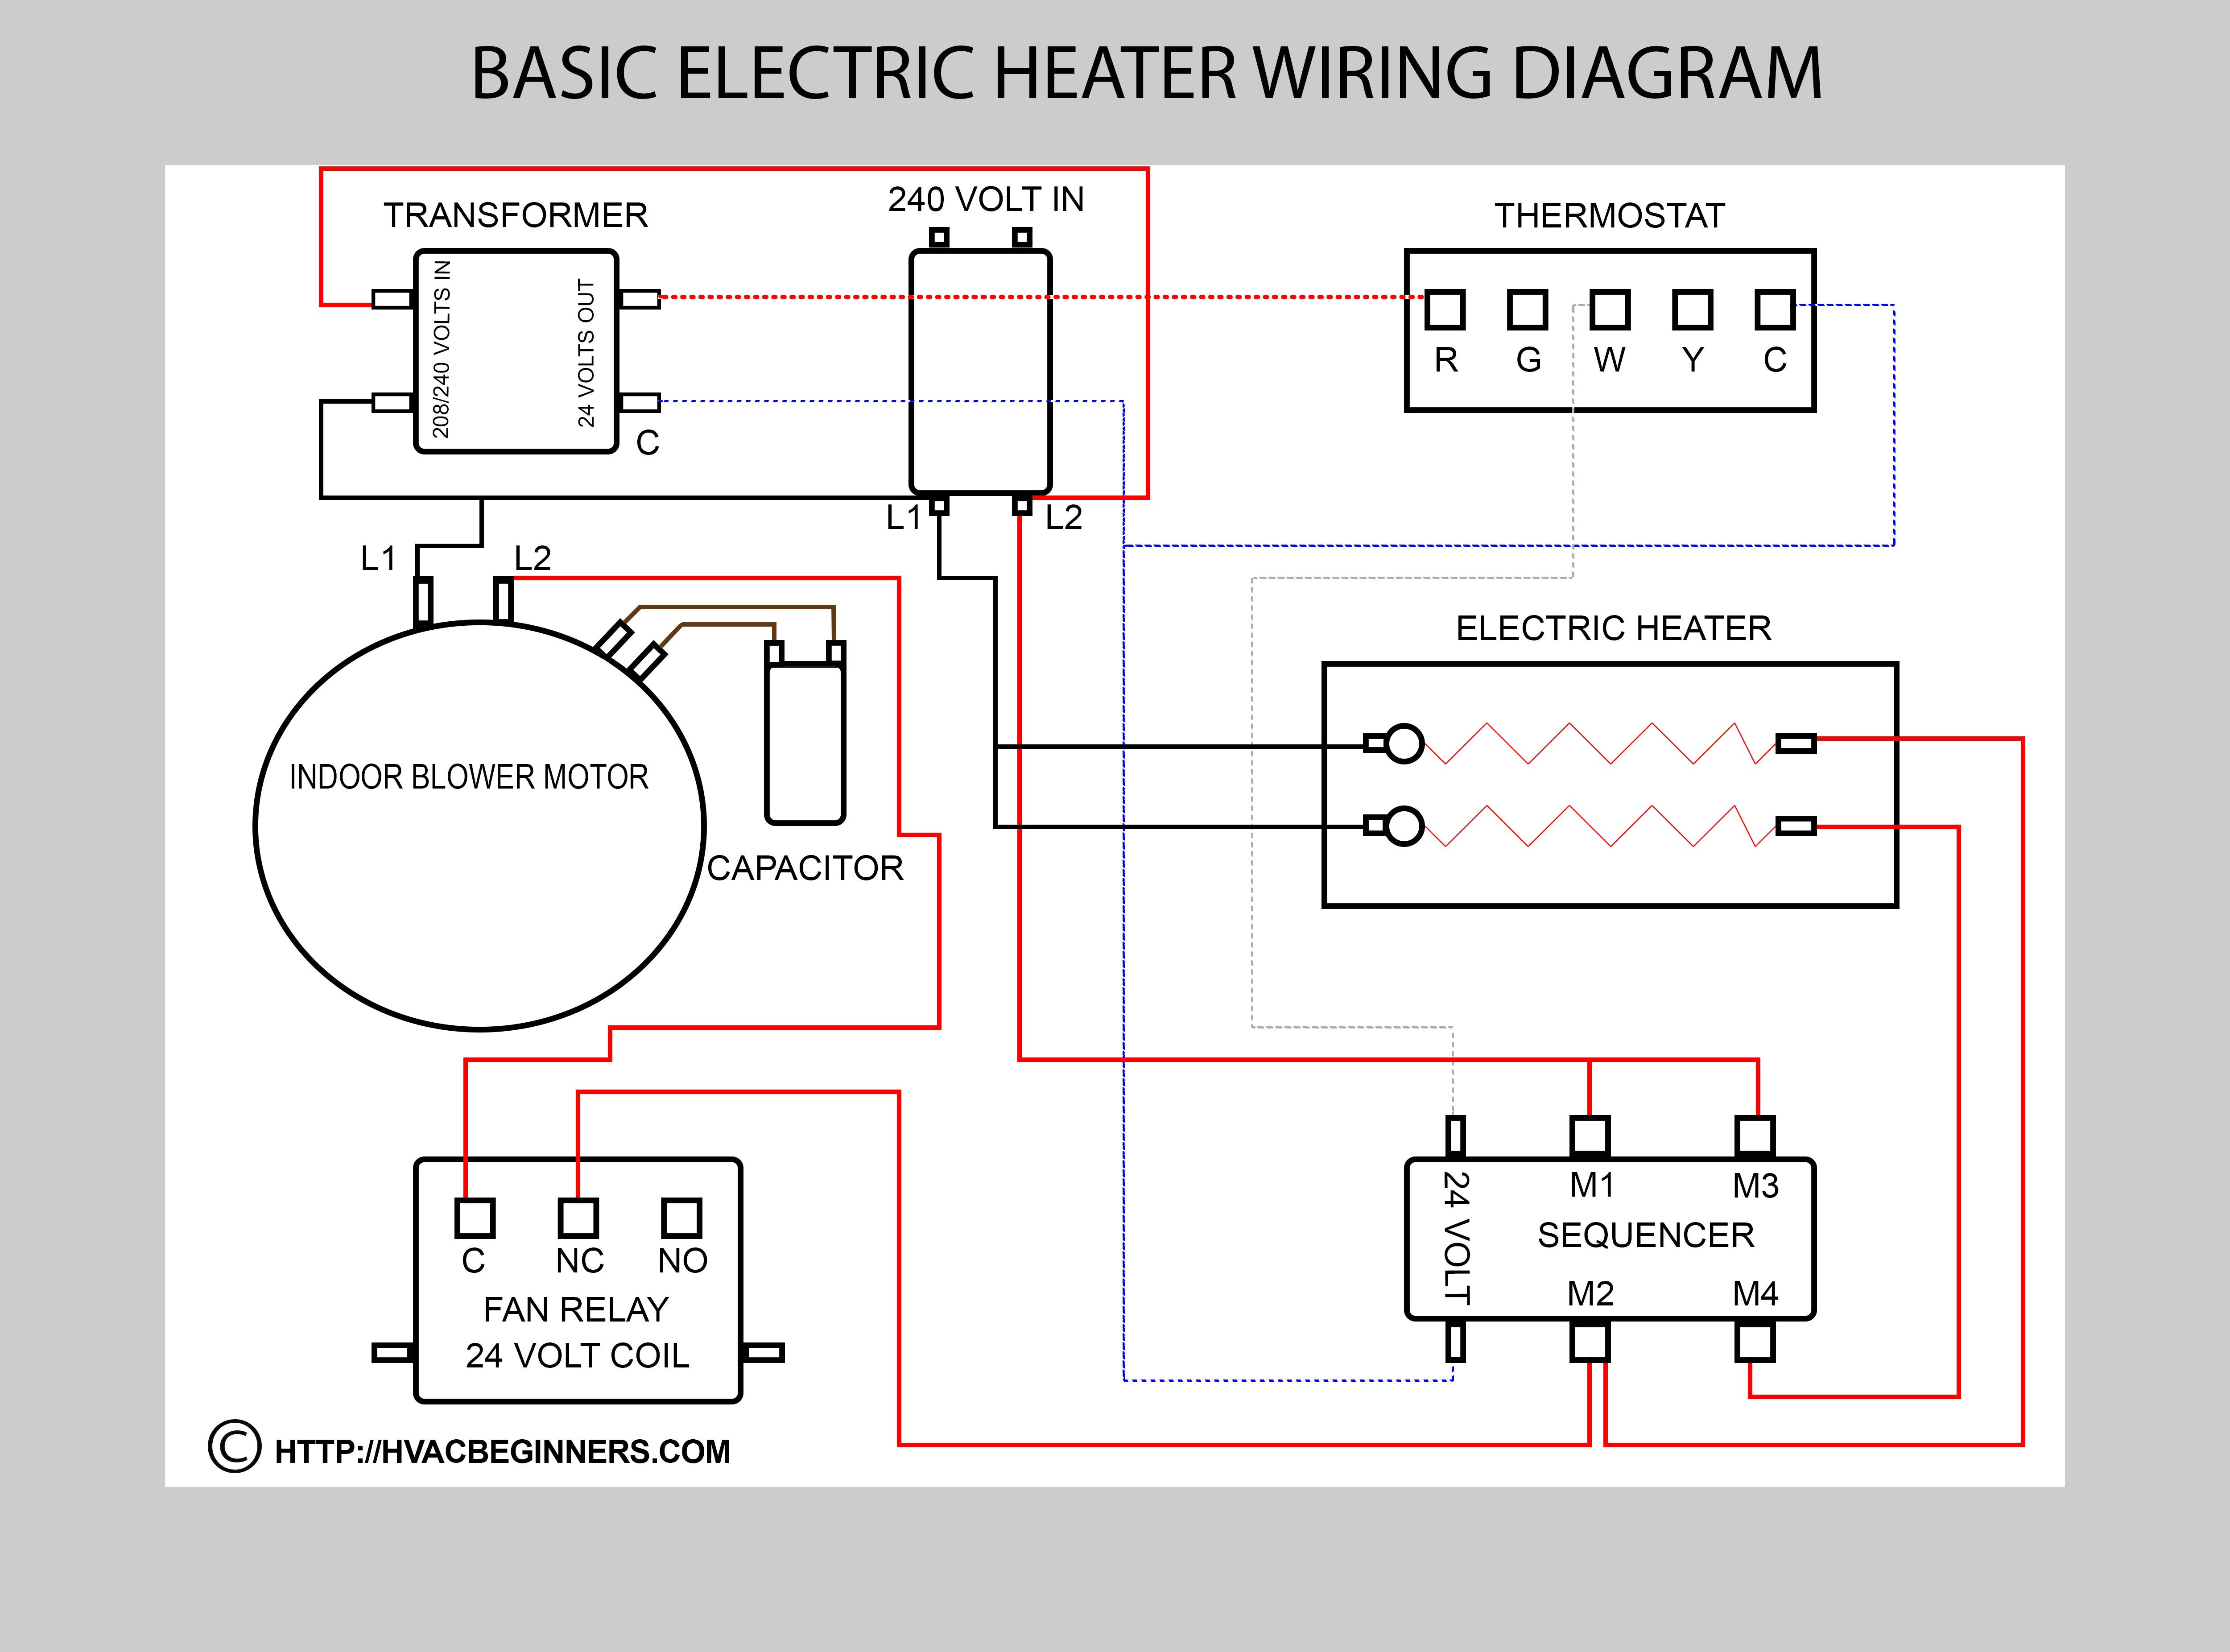 Intertherm Diagram Electric Wiring Furnace A793523 - Wiring Diagram - Wiring Diagram For Mobile Home Furnace